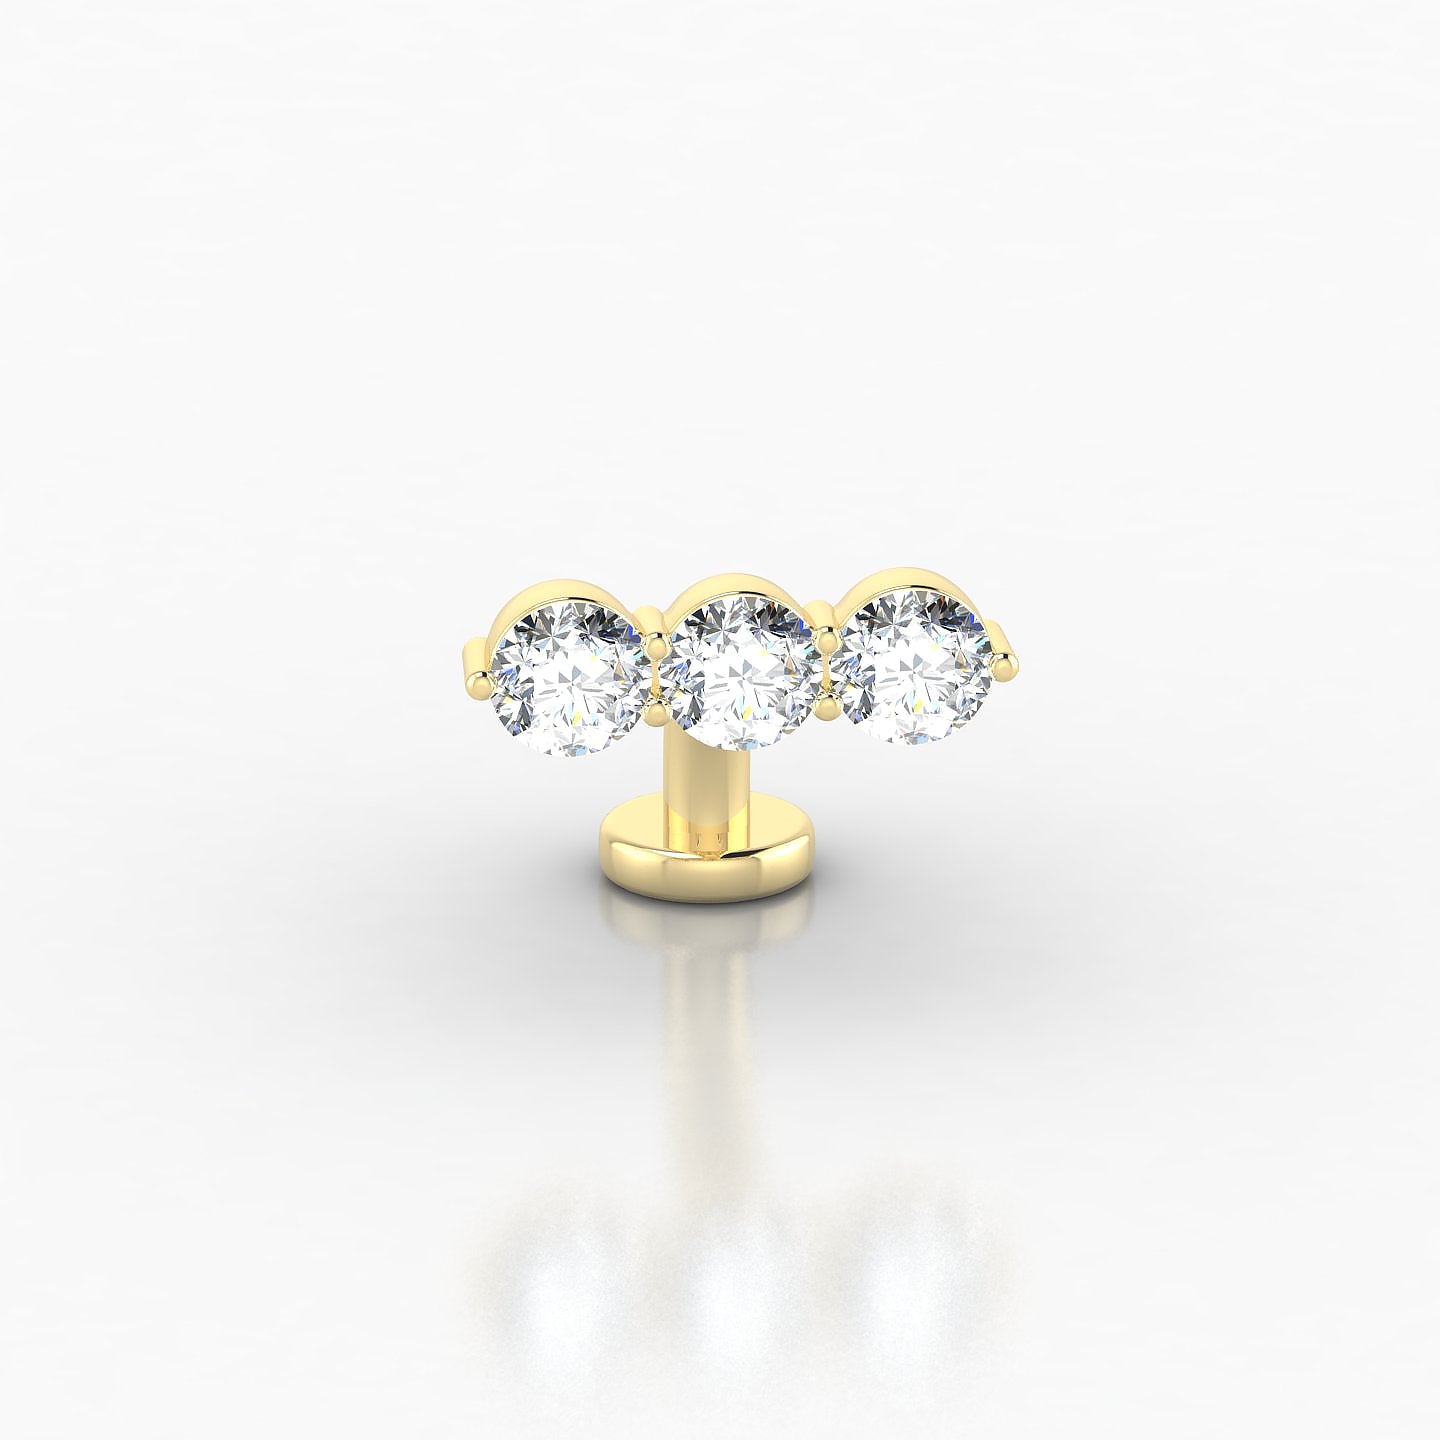 Ma'at | 18k Yellow Gold 8 mm 10 mm Trilogy Diamond Floating Navel Piercing